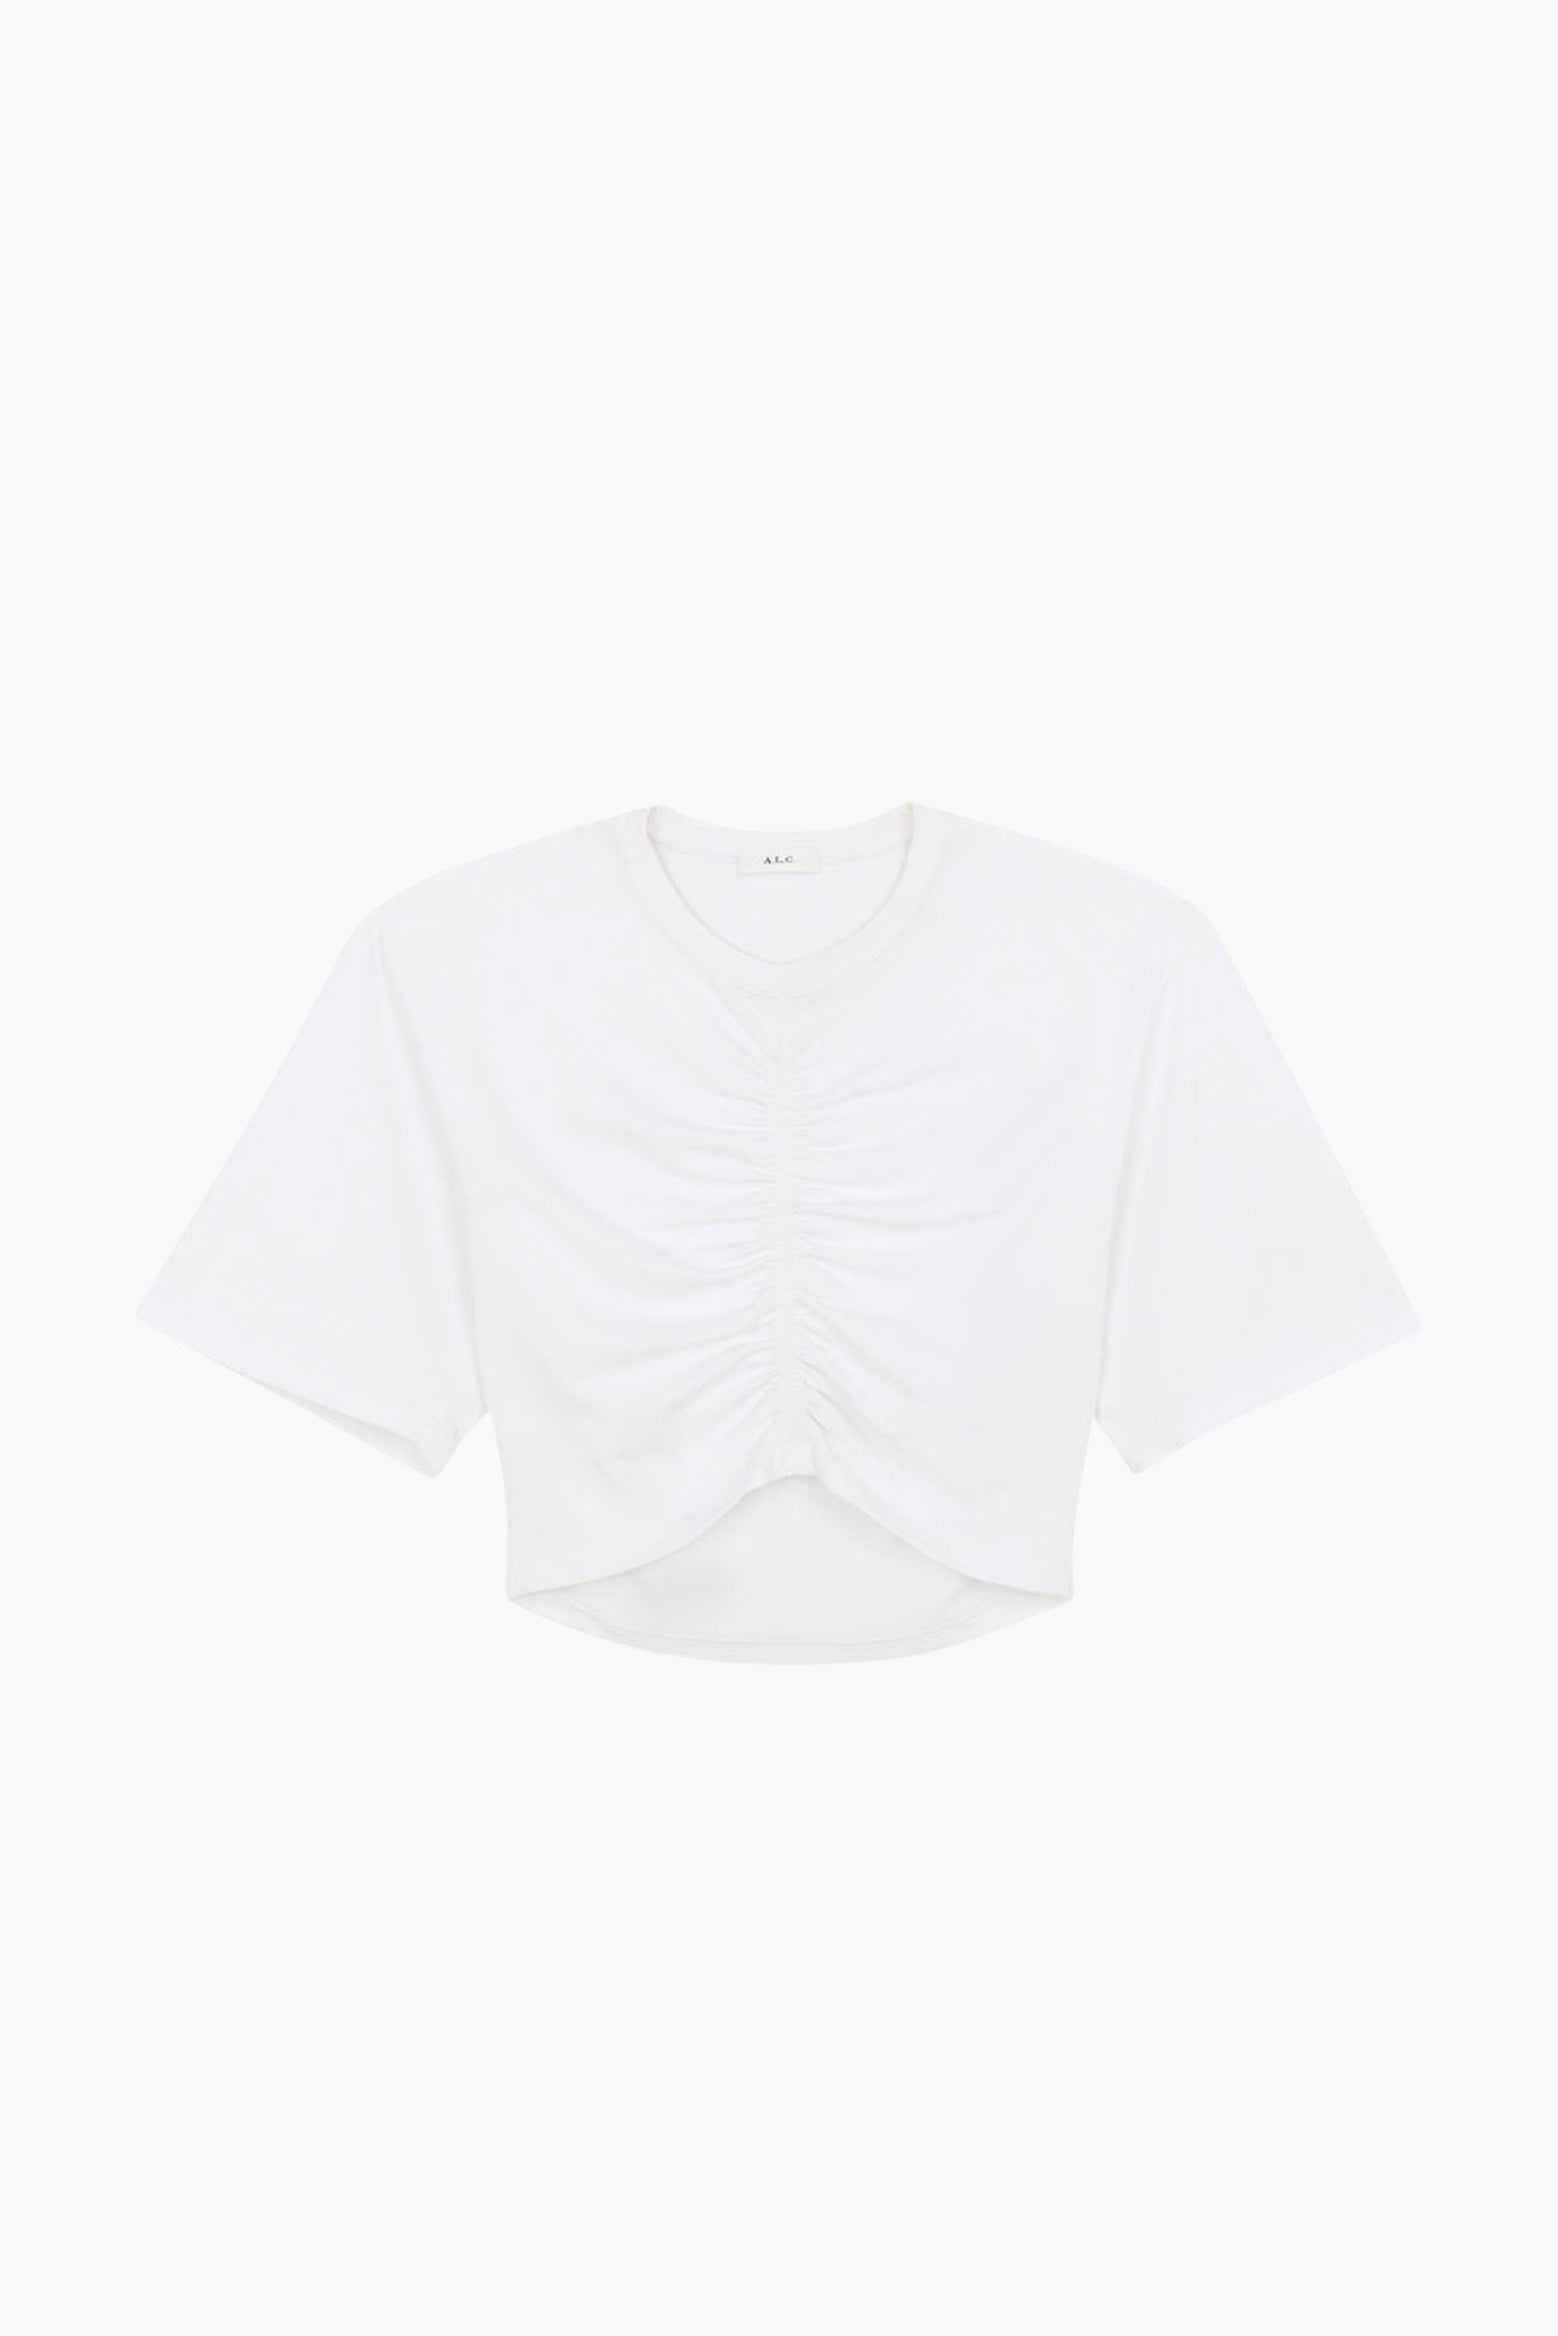 ALC Johanna Tee in white available at TNT The New Trend Australia.